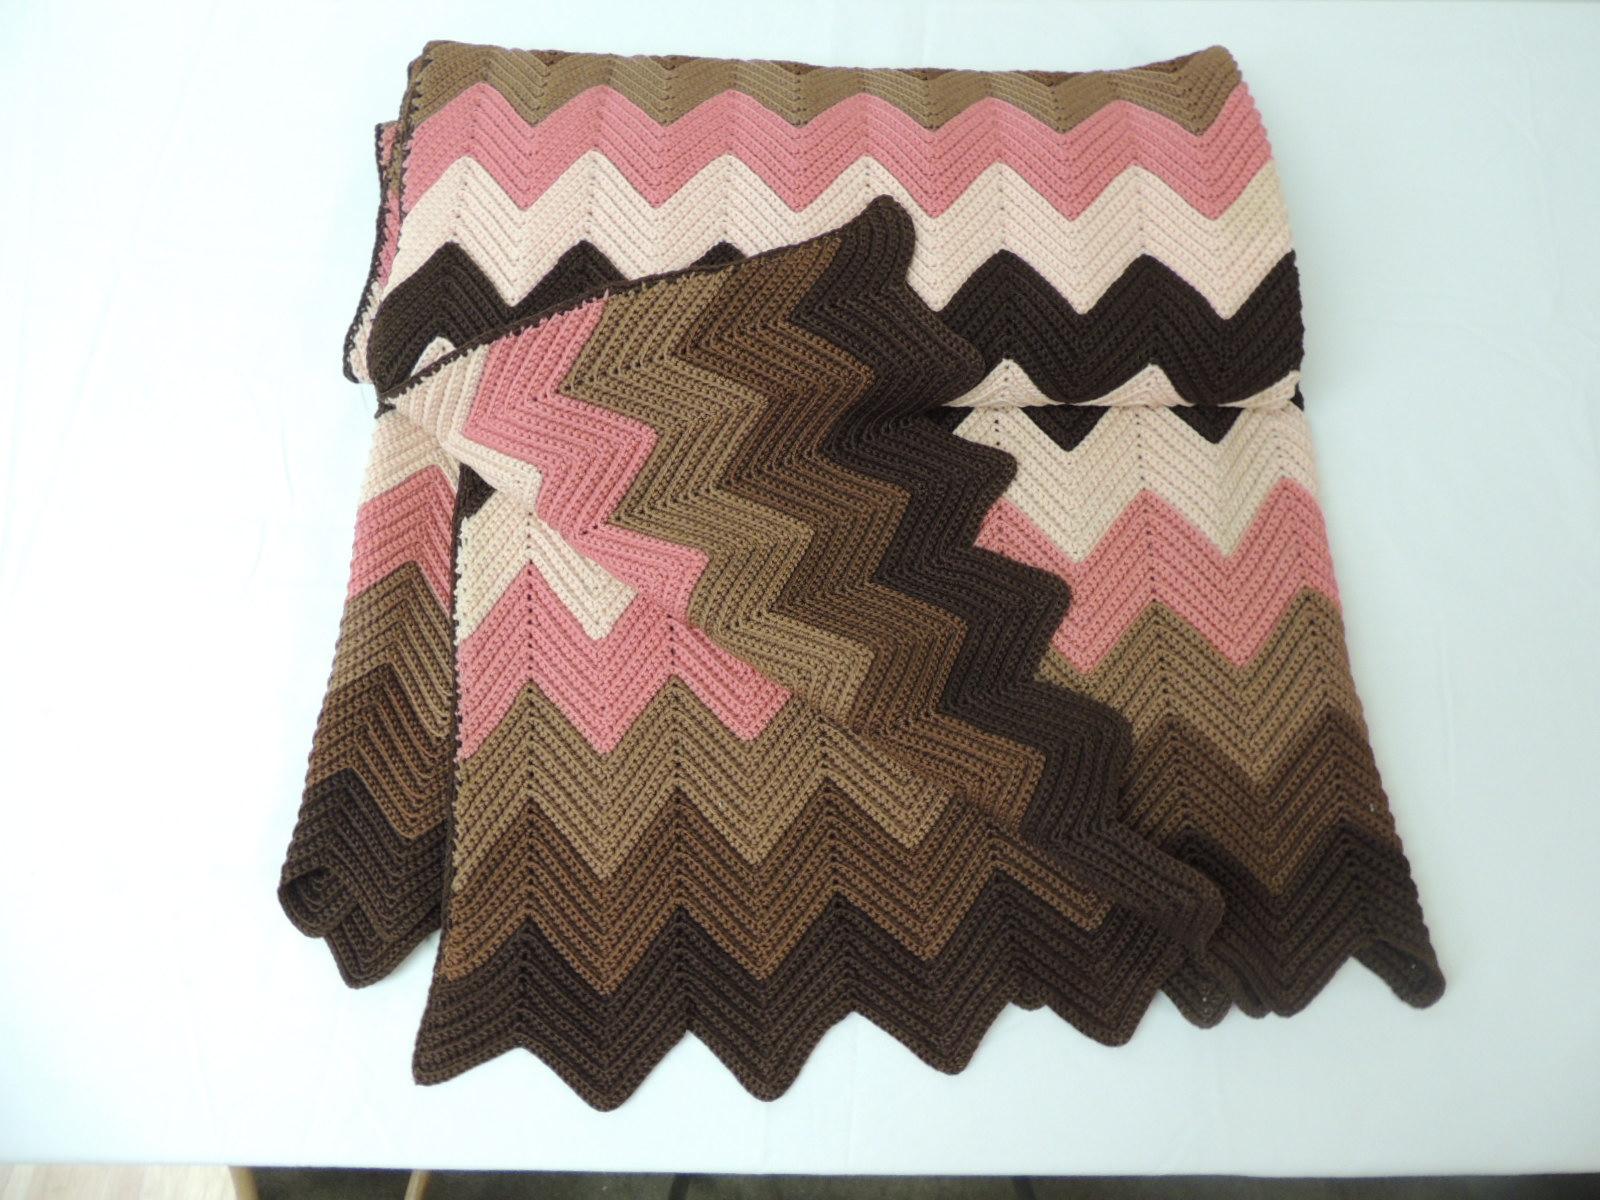 Chevron pattern pink and brown large throw or blanket.
Boho chic handmade throw in various graded shades of pink, peach and brown.
Size: 86 long x 44 W.
 